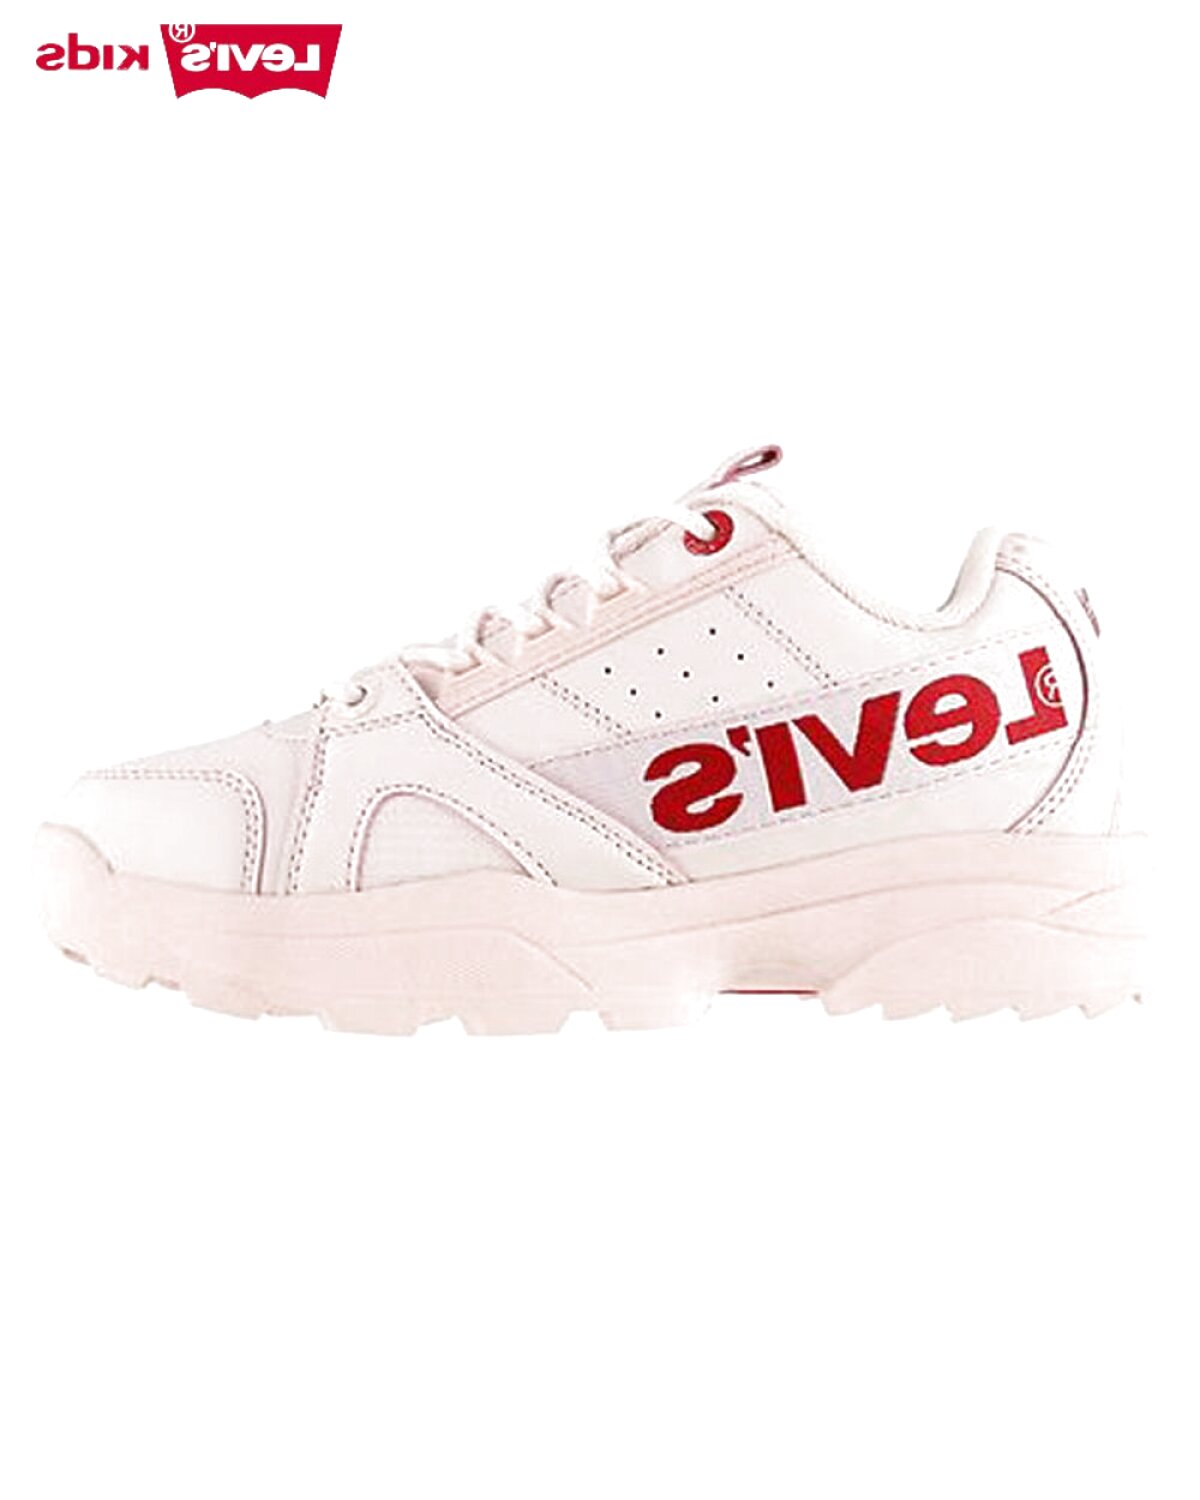 Shopping \u003e scarpe levis bianche, Up to 74% OFF